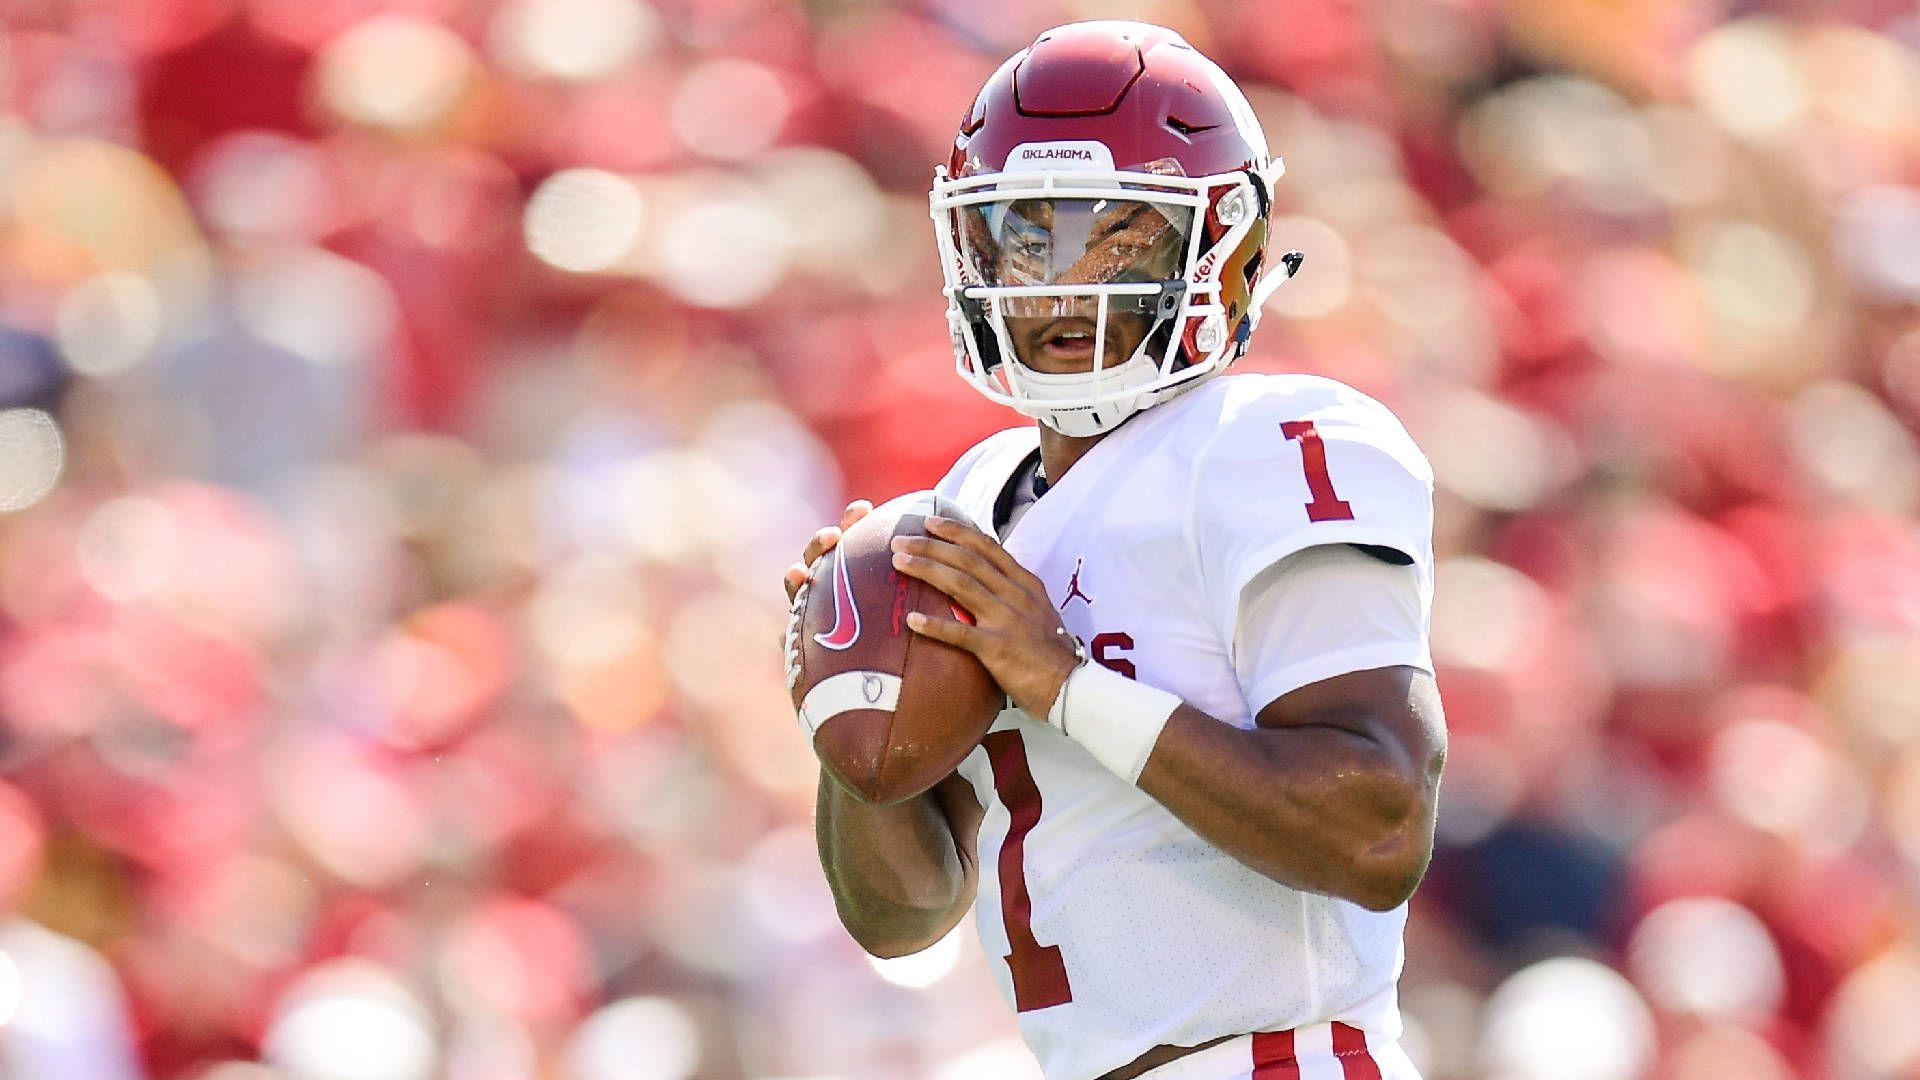 Another Heisman Hopeful? Official Site of Oklahoma Sooner Sports